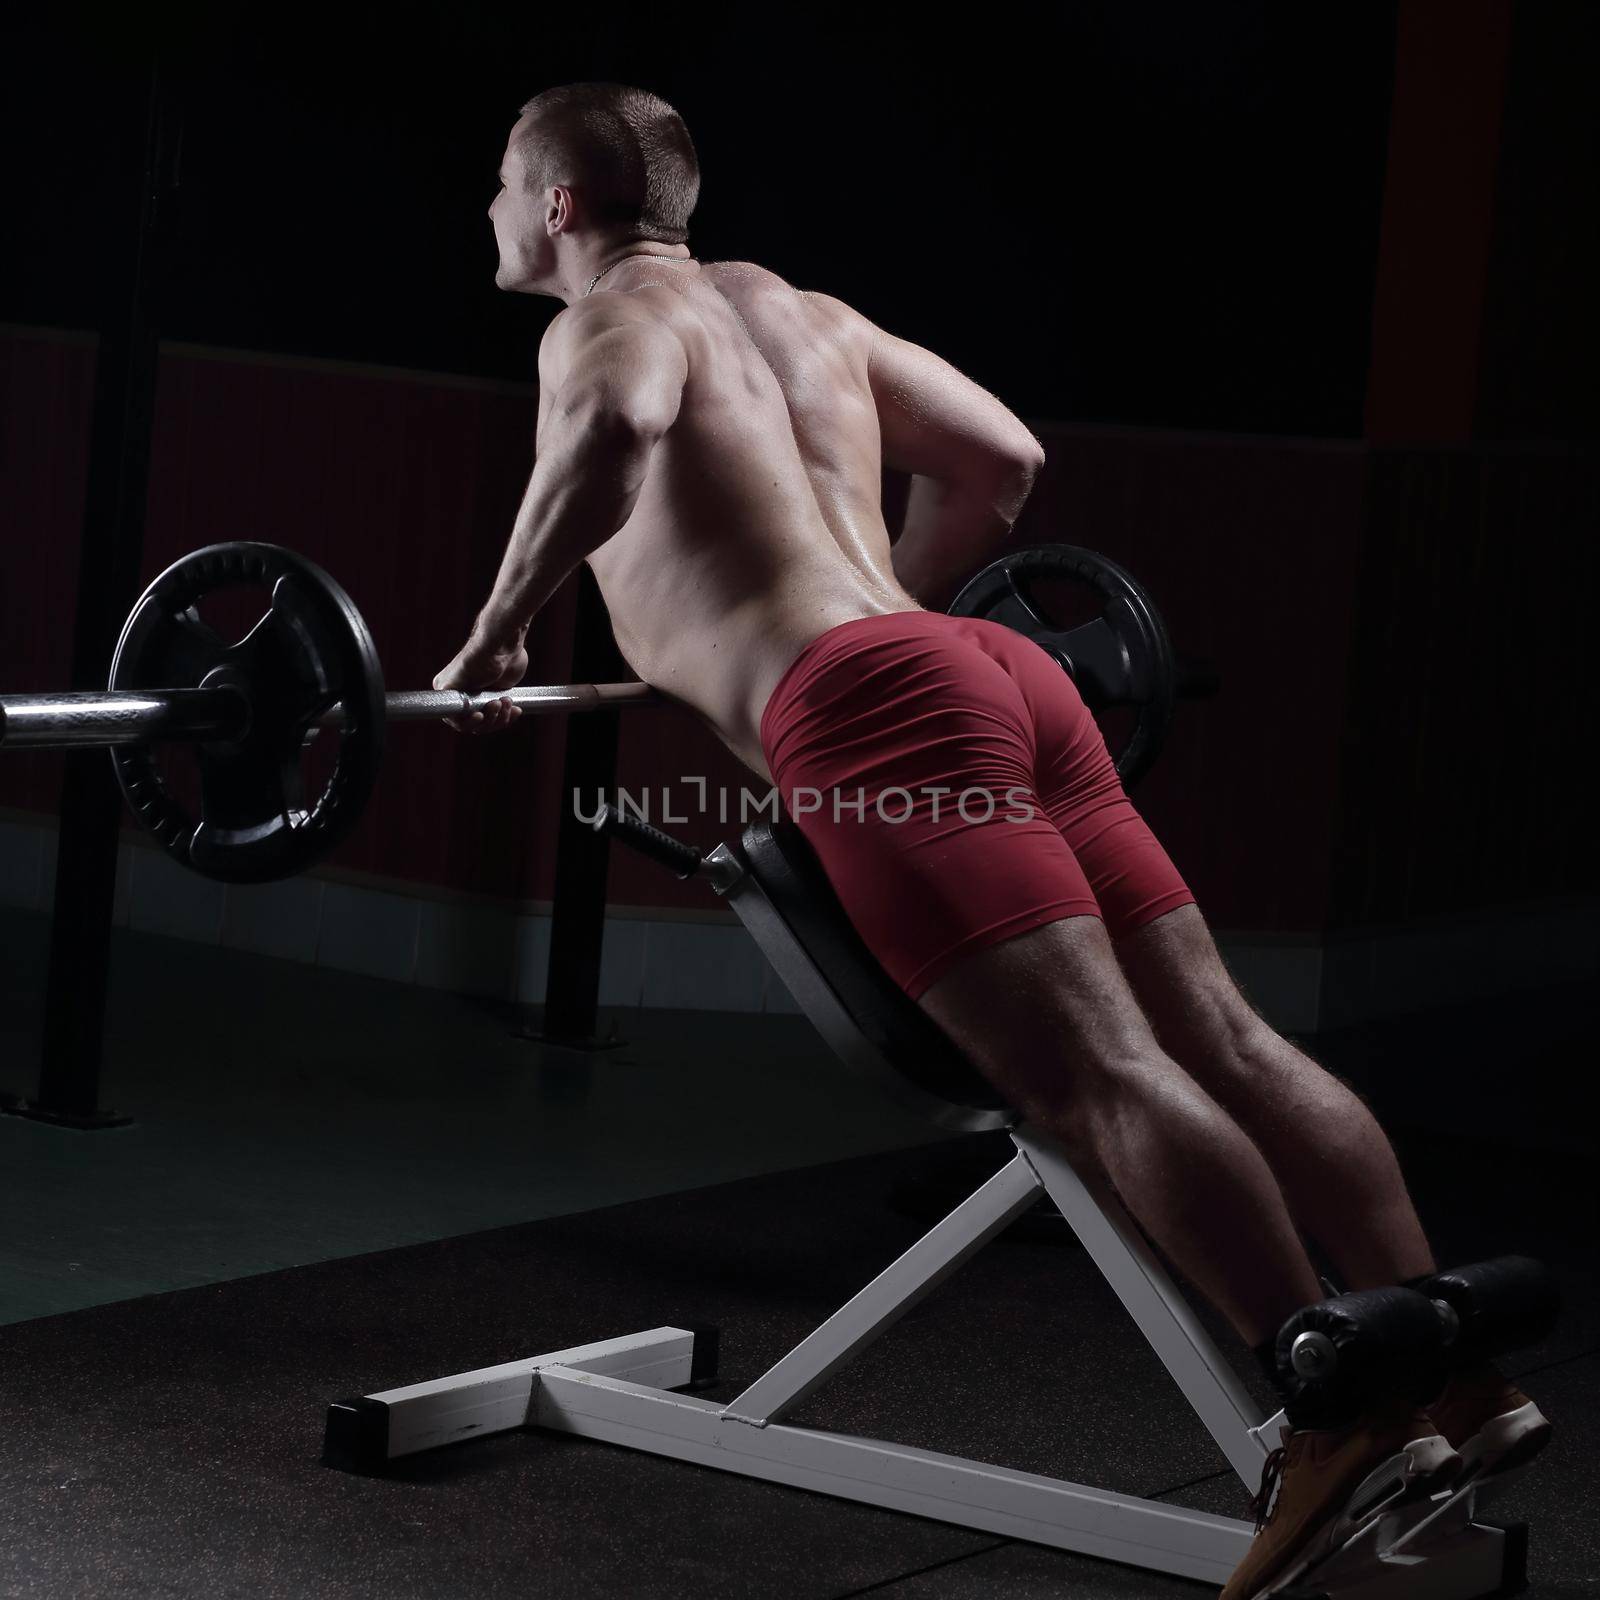 rear view .a man bodybuilder performs an exercise on the simulator.photo on a black background